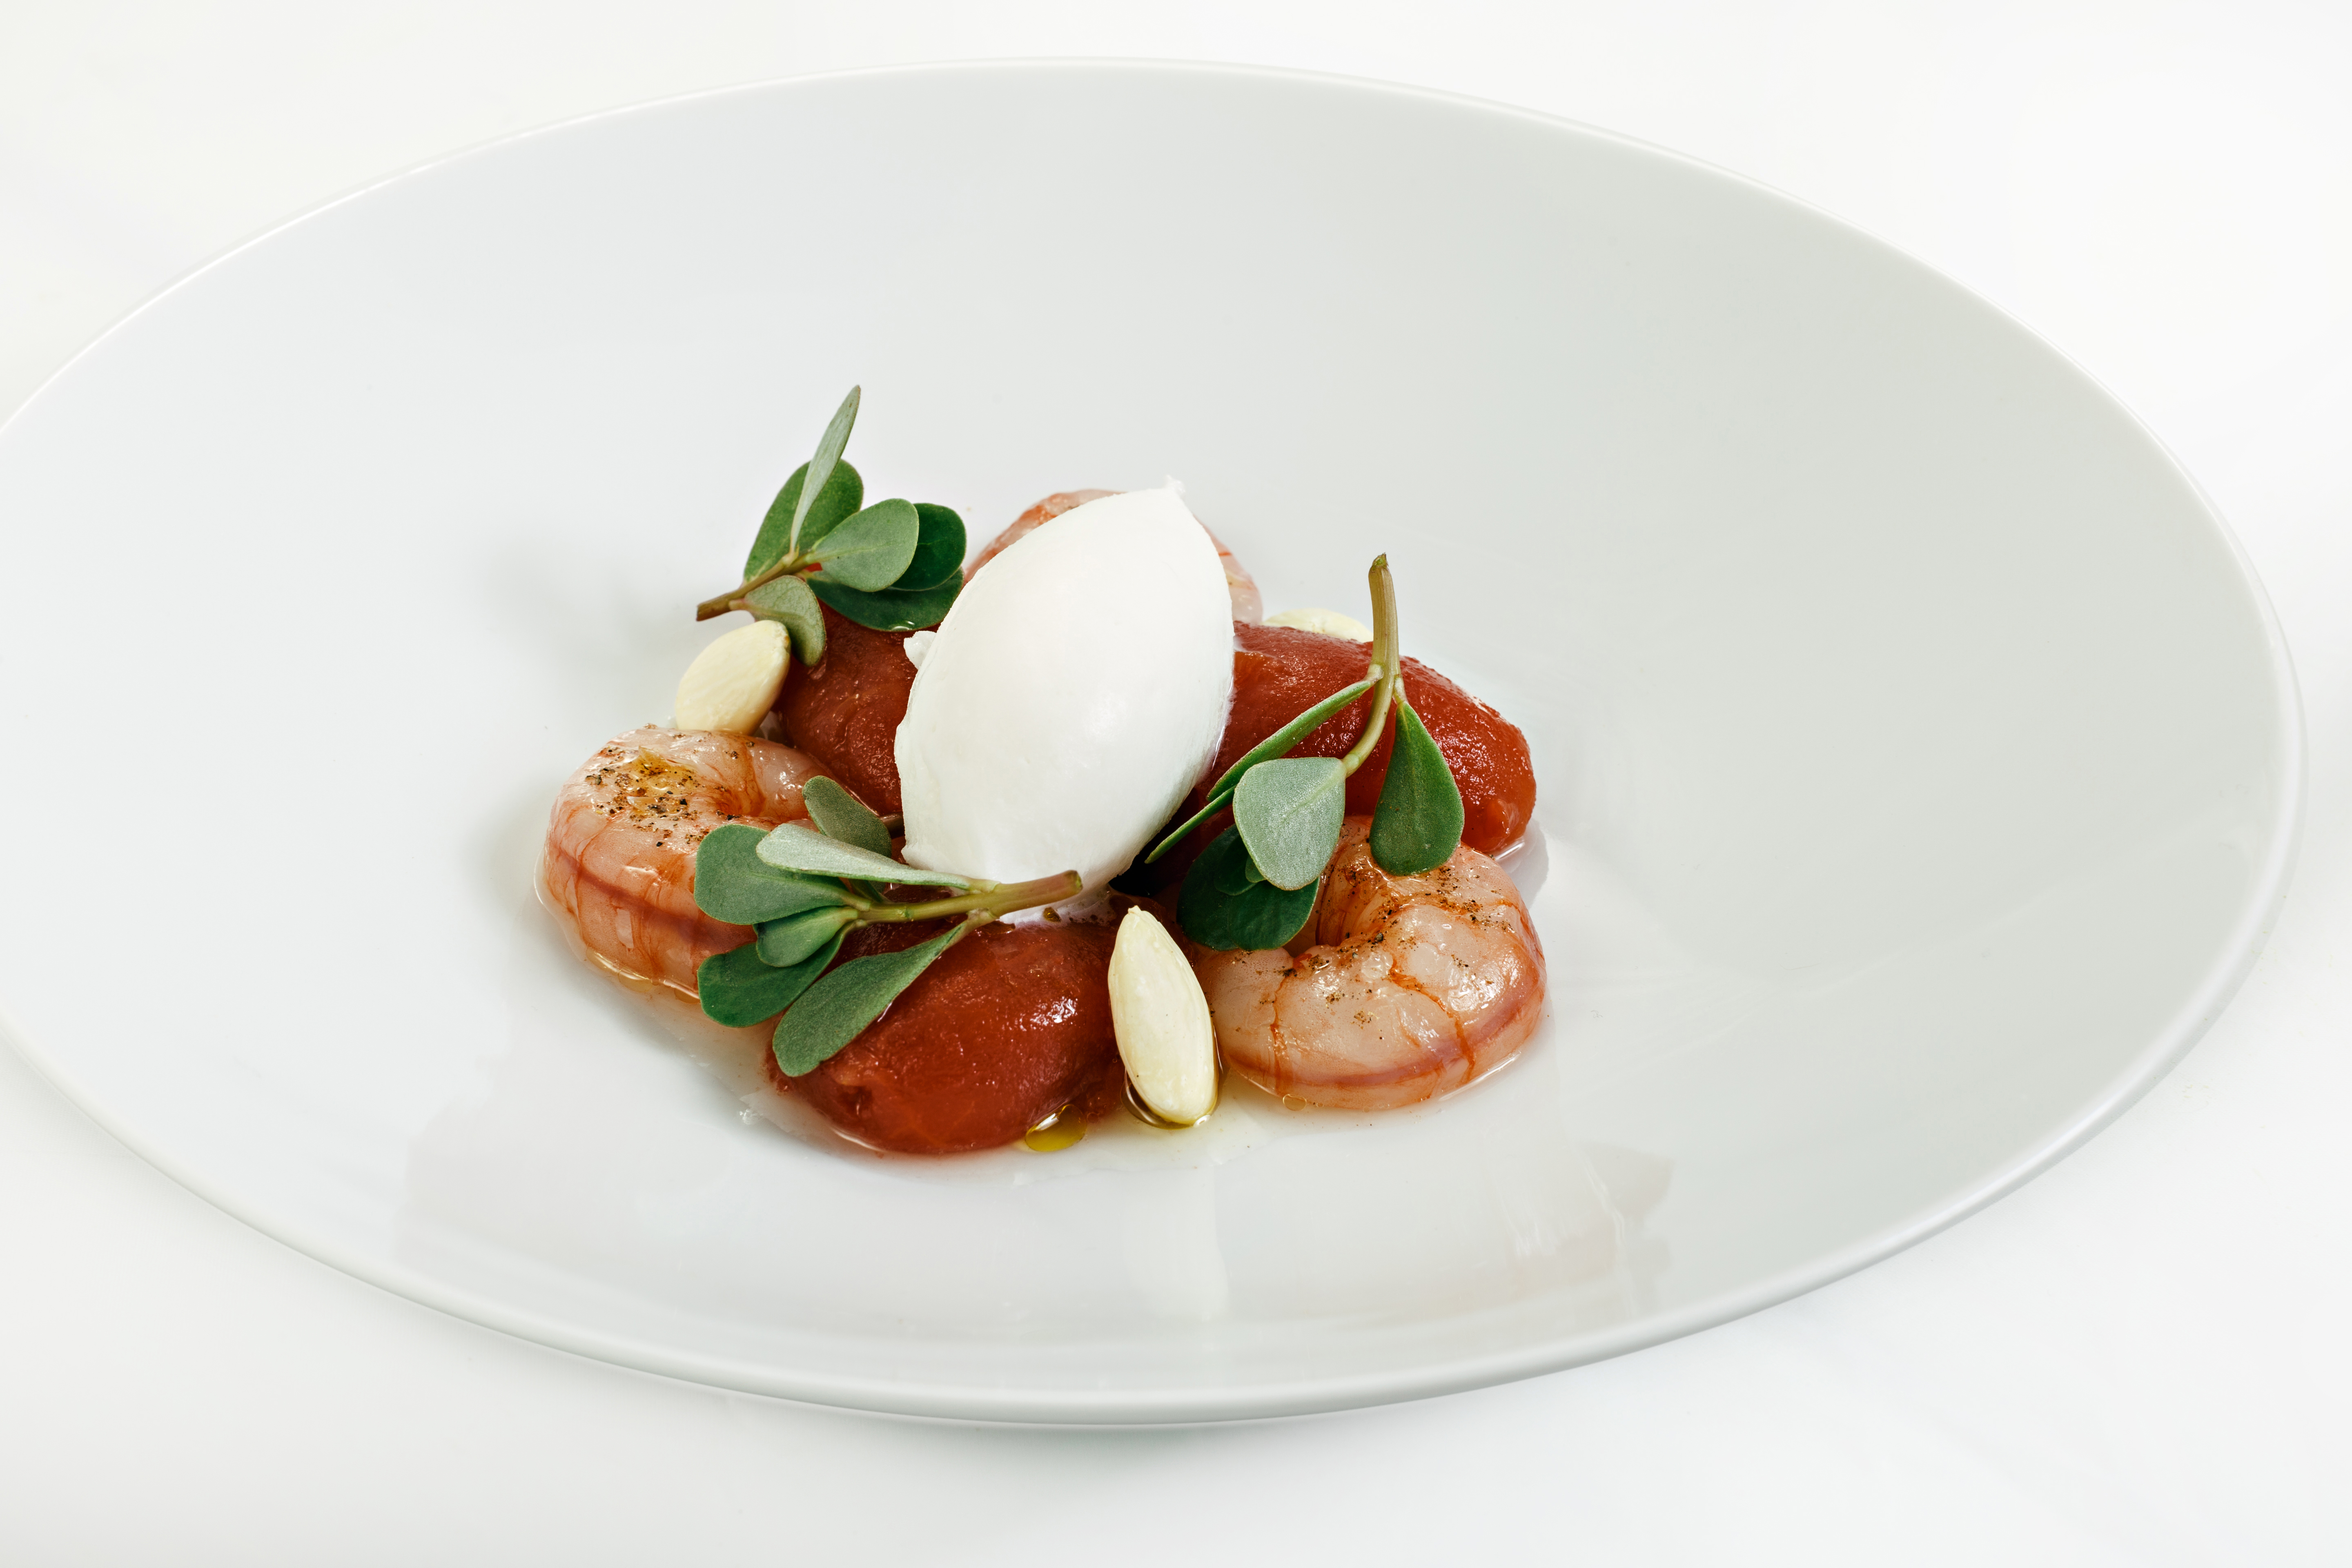 Enjoy a Gourmet Experience staying with us and discover our menu with Michelin Star